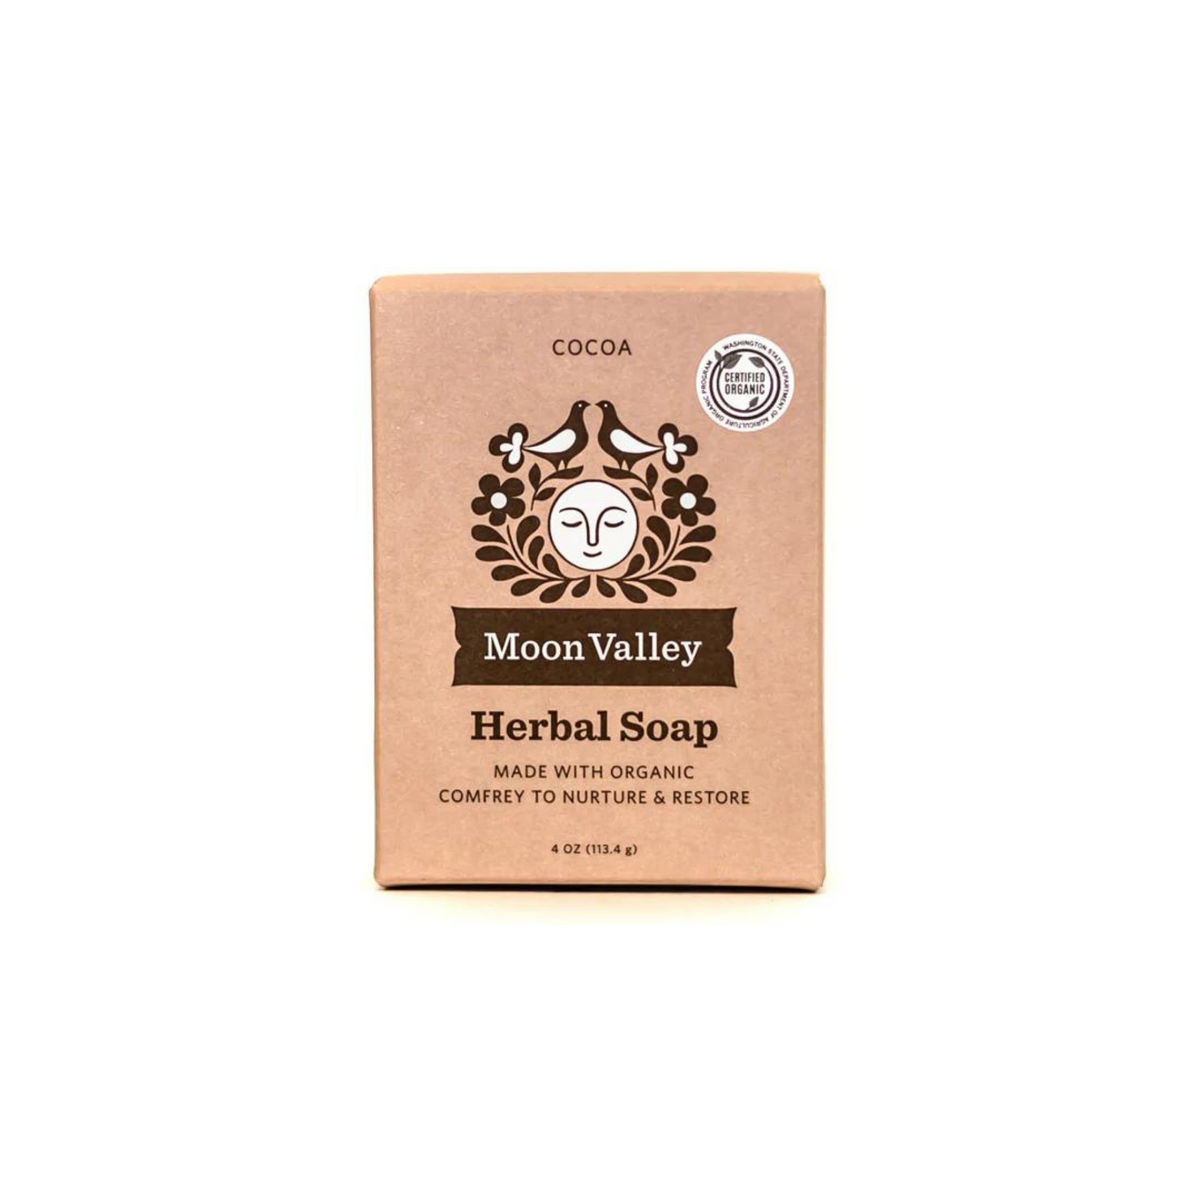 Primary Image of Cocoa Herbal Soap